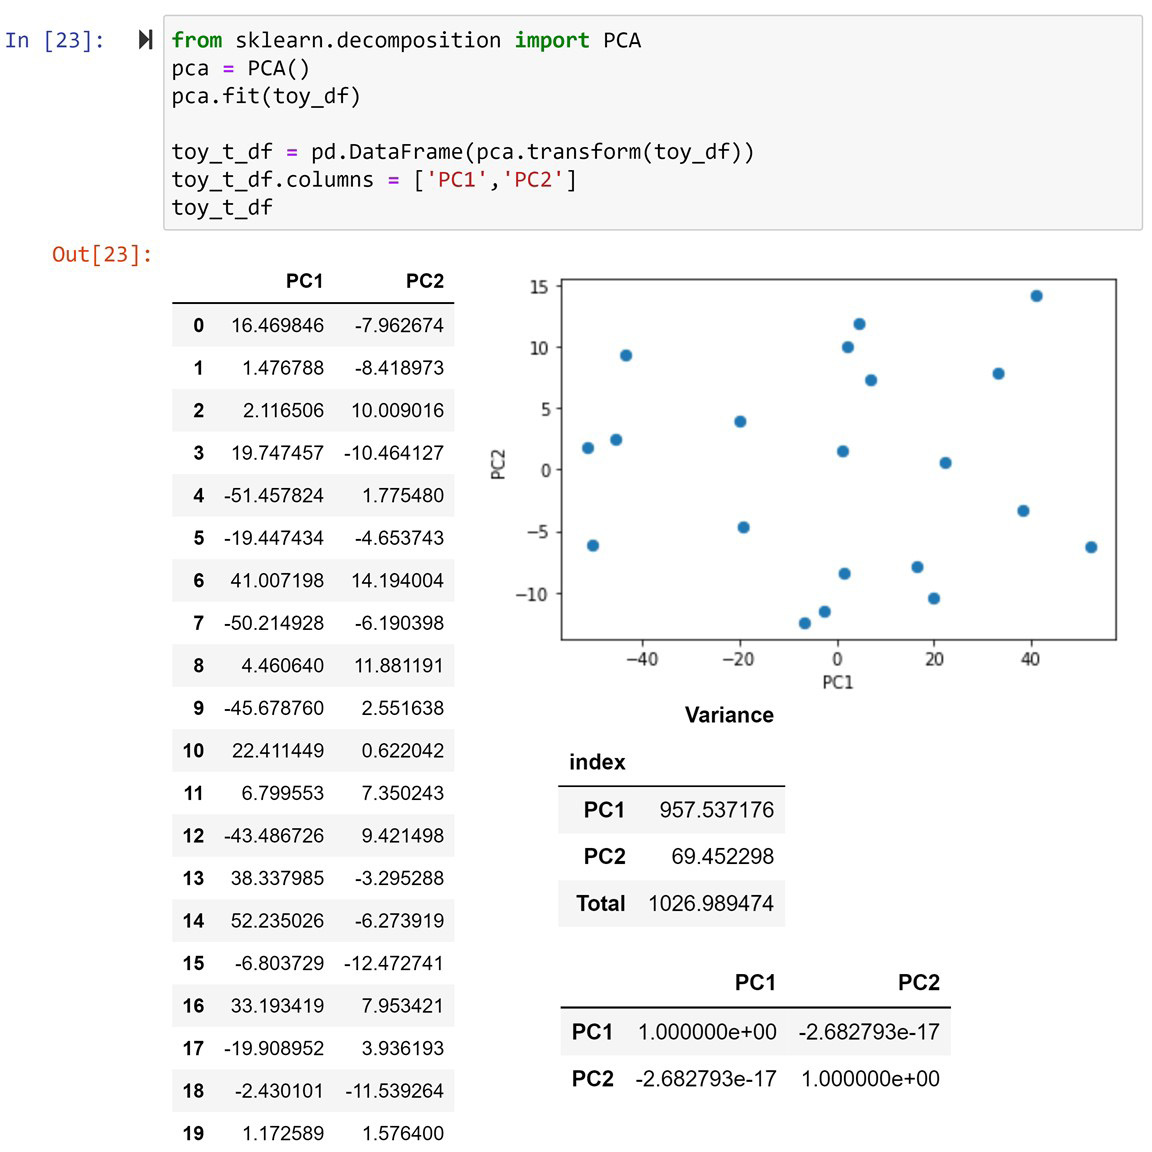 Figure 13.11 – A dashboard containing information and visuals for the PCA transformed toy_df dataset
